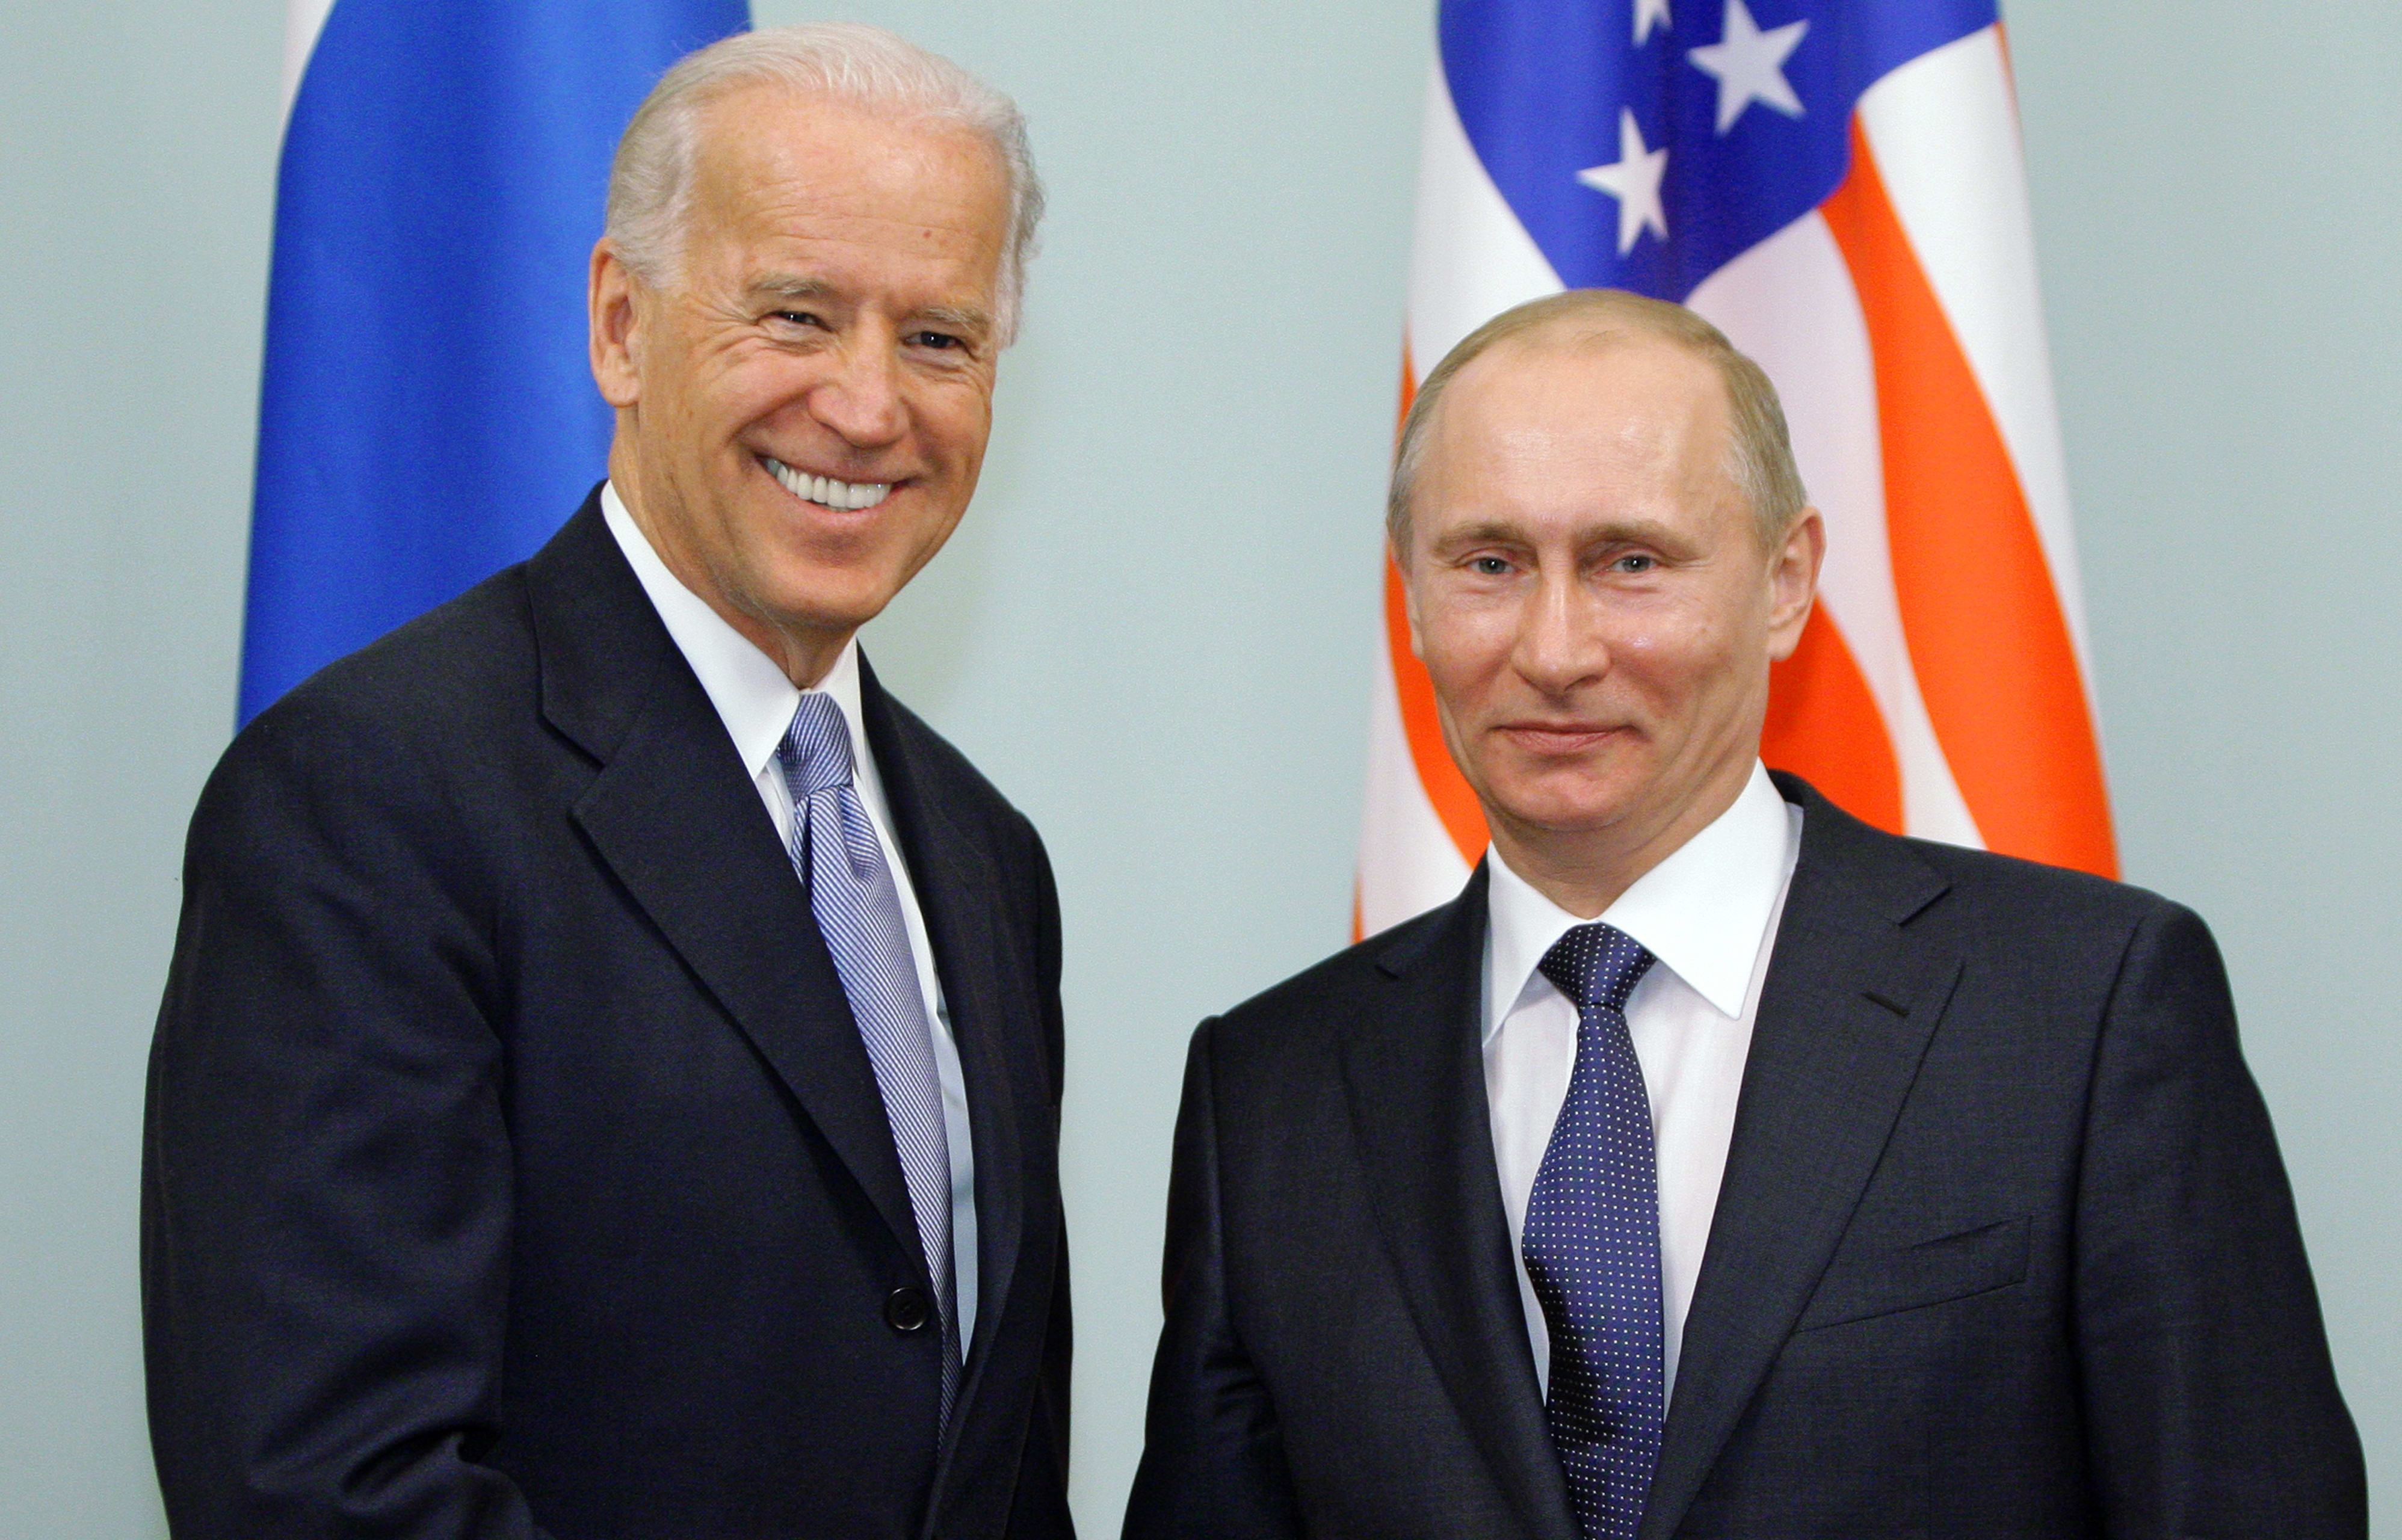 (FILES) In this file photo taken on March 10, 2011, Russian Prime Minister Vladimir Putin (R) shakes hands with US Vice President Joe Biden during their meeting in Moscow.